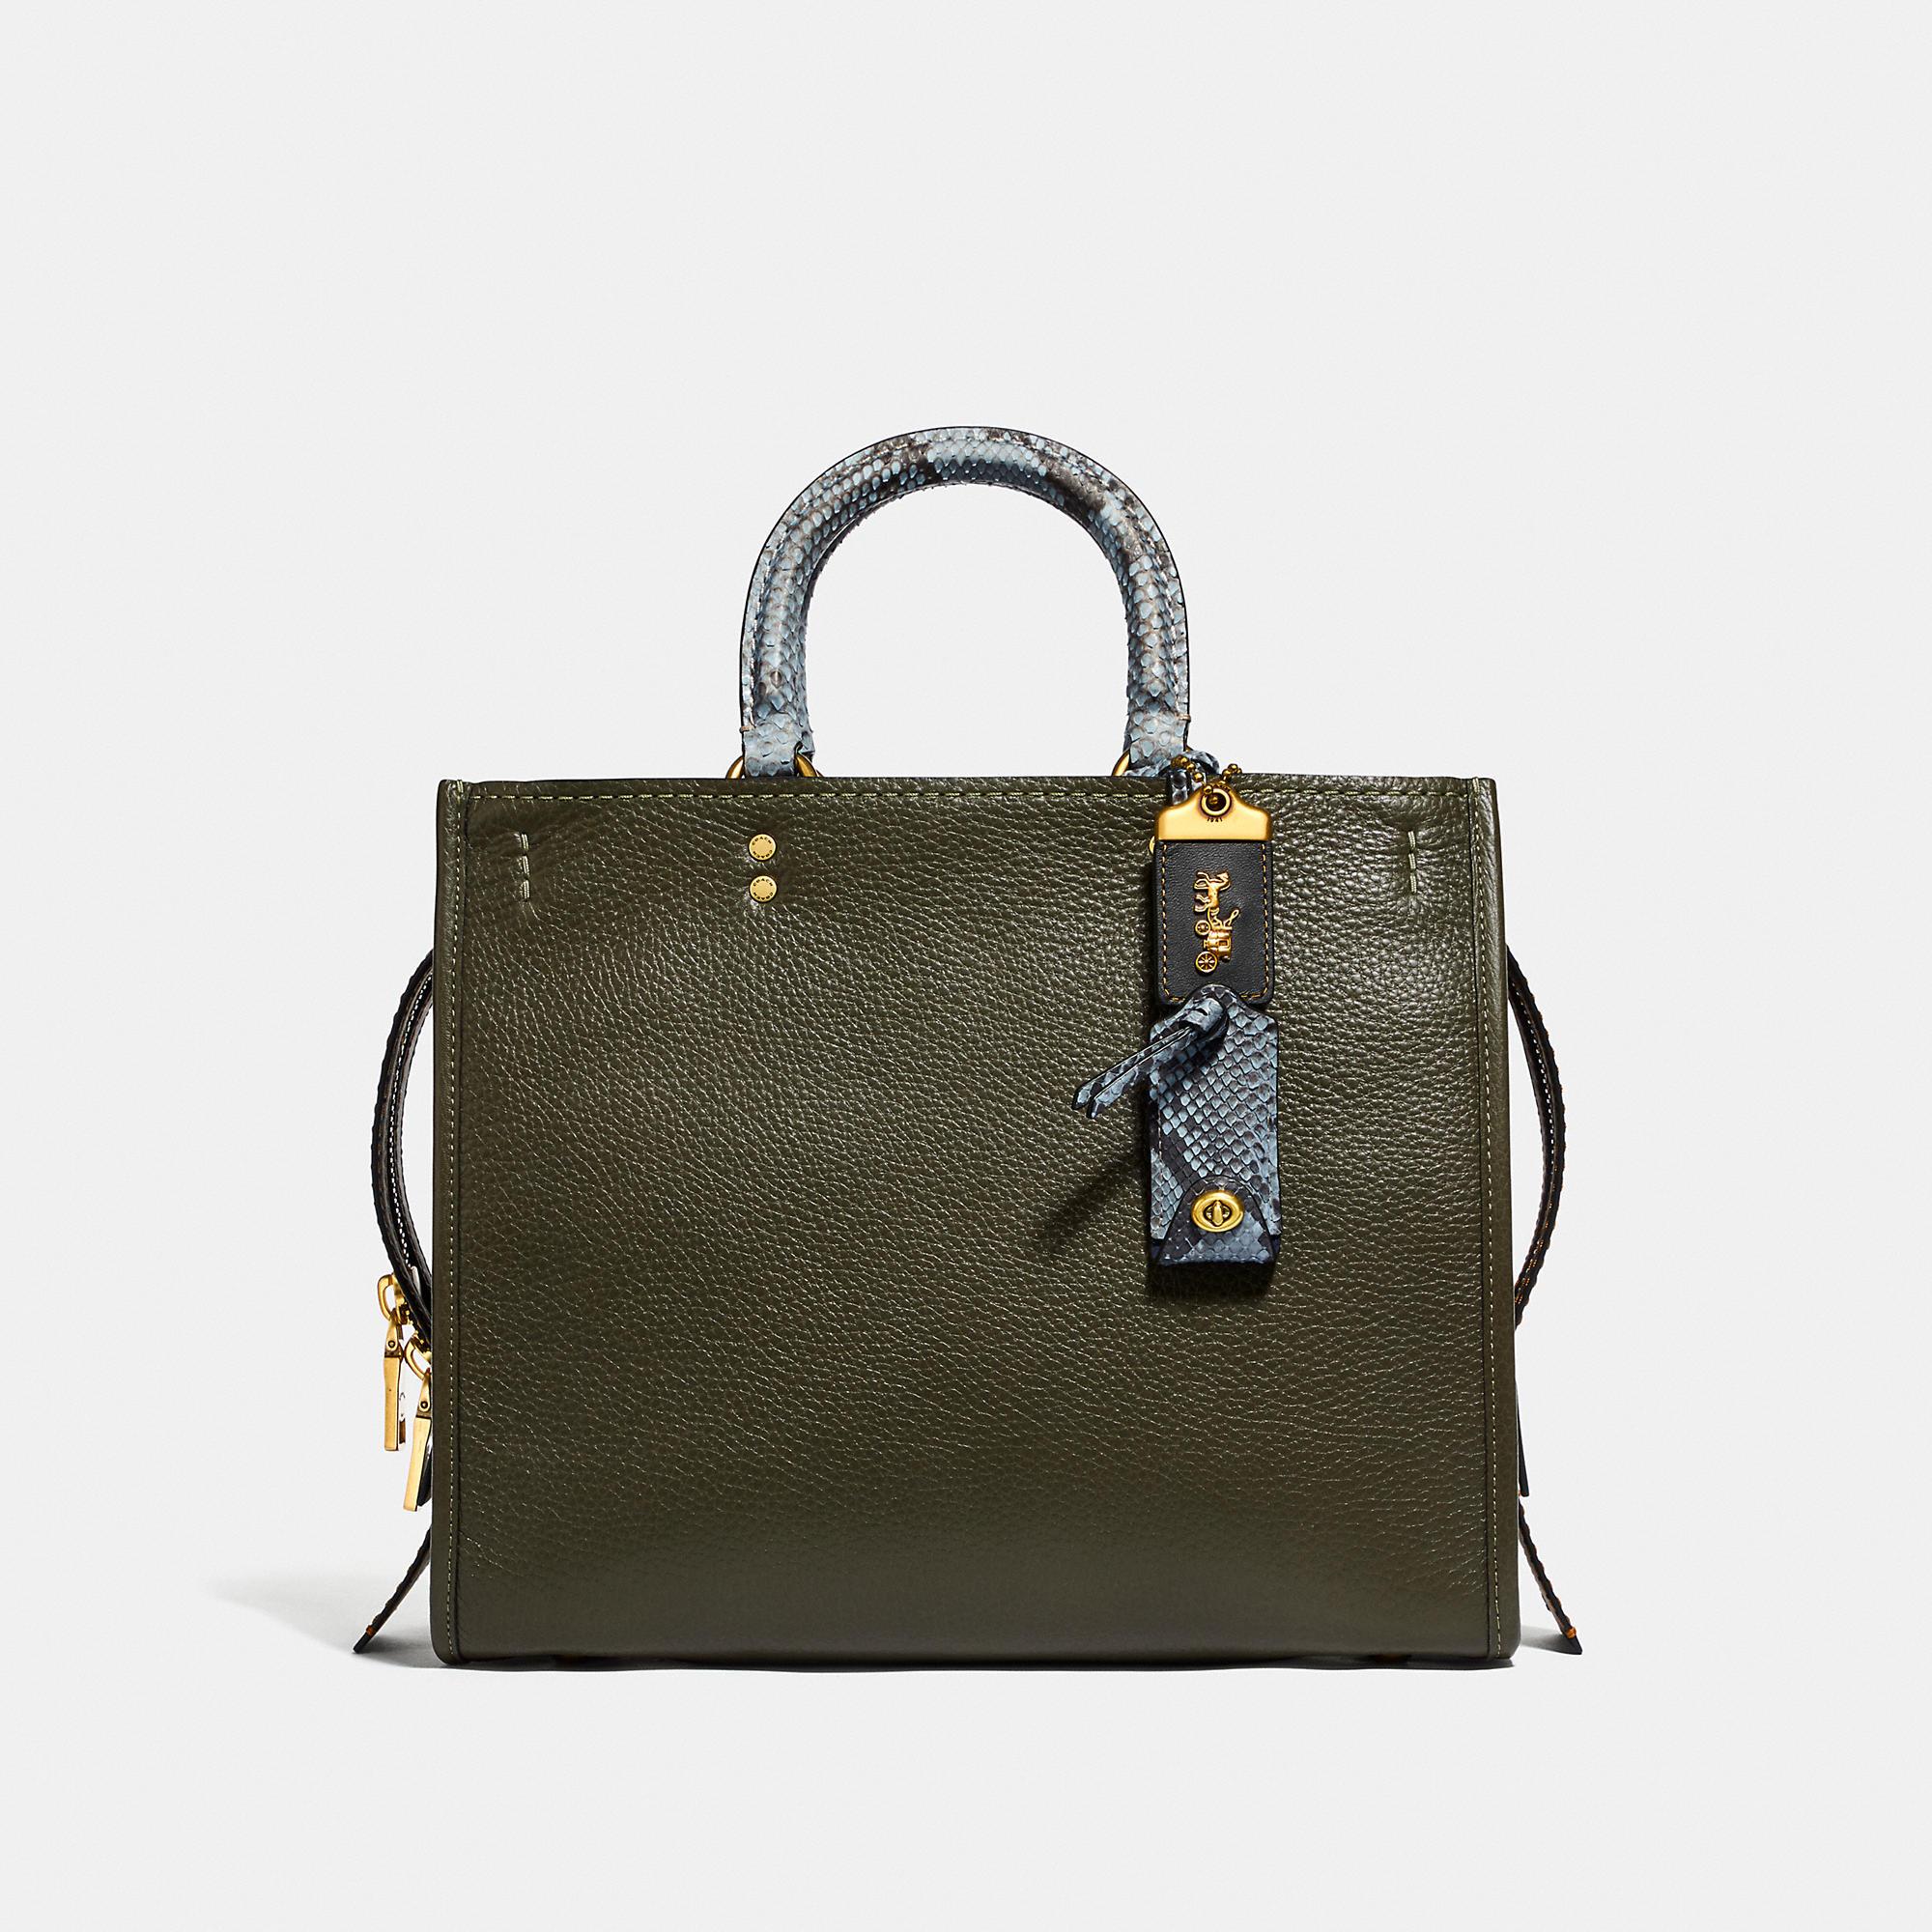 COACH Rogue In Colorblock With Snakeskin Detail in Green - Lyst